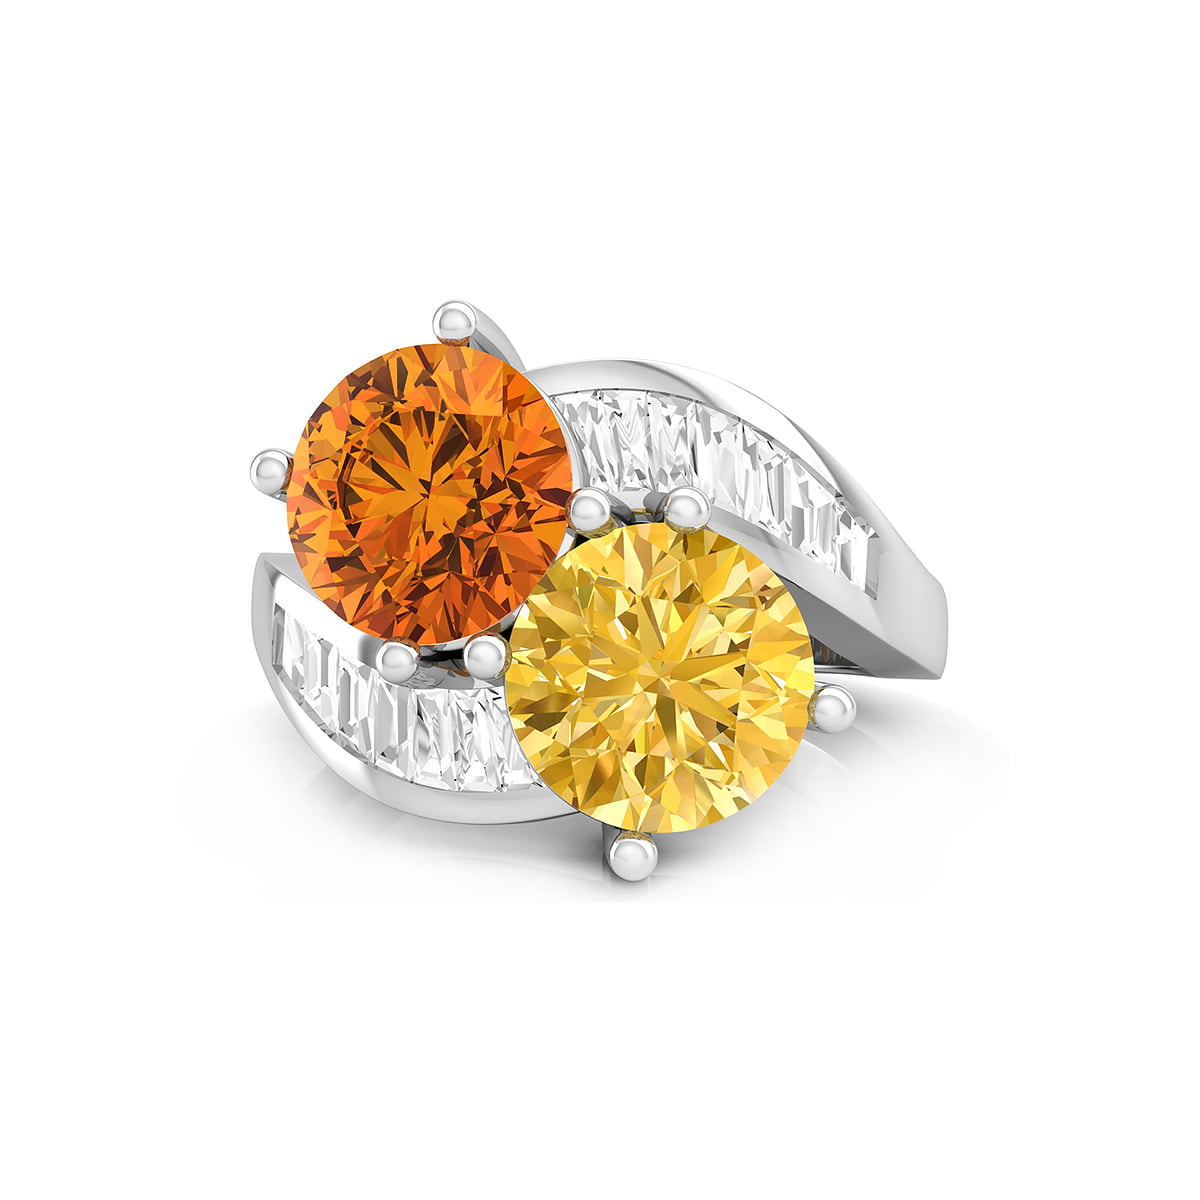 Yellow & Orange Round Cut CZ Stone Bypass Shank- Channel Setting Toi Et Moi Engagement Ring